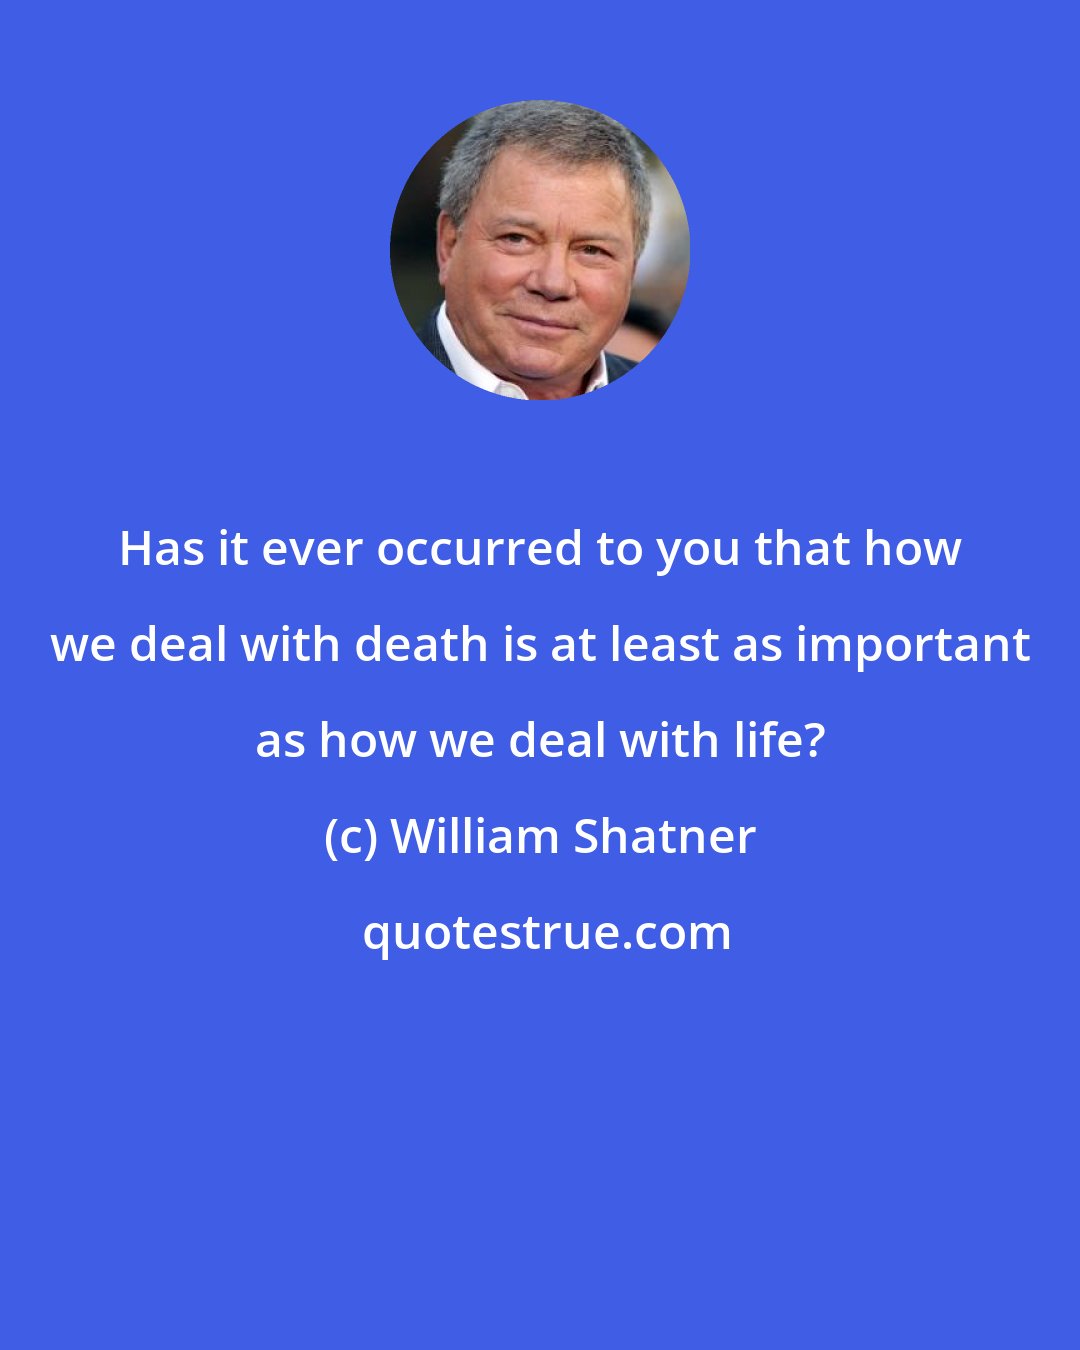 William Shatner: Has it ever occurred to you that how we deal with death is at least as important as how we deal with life?